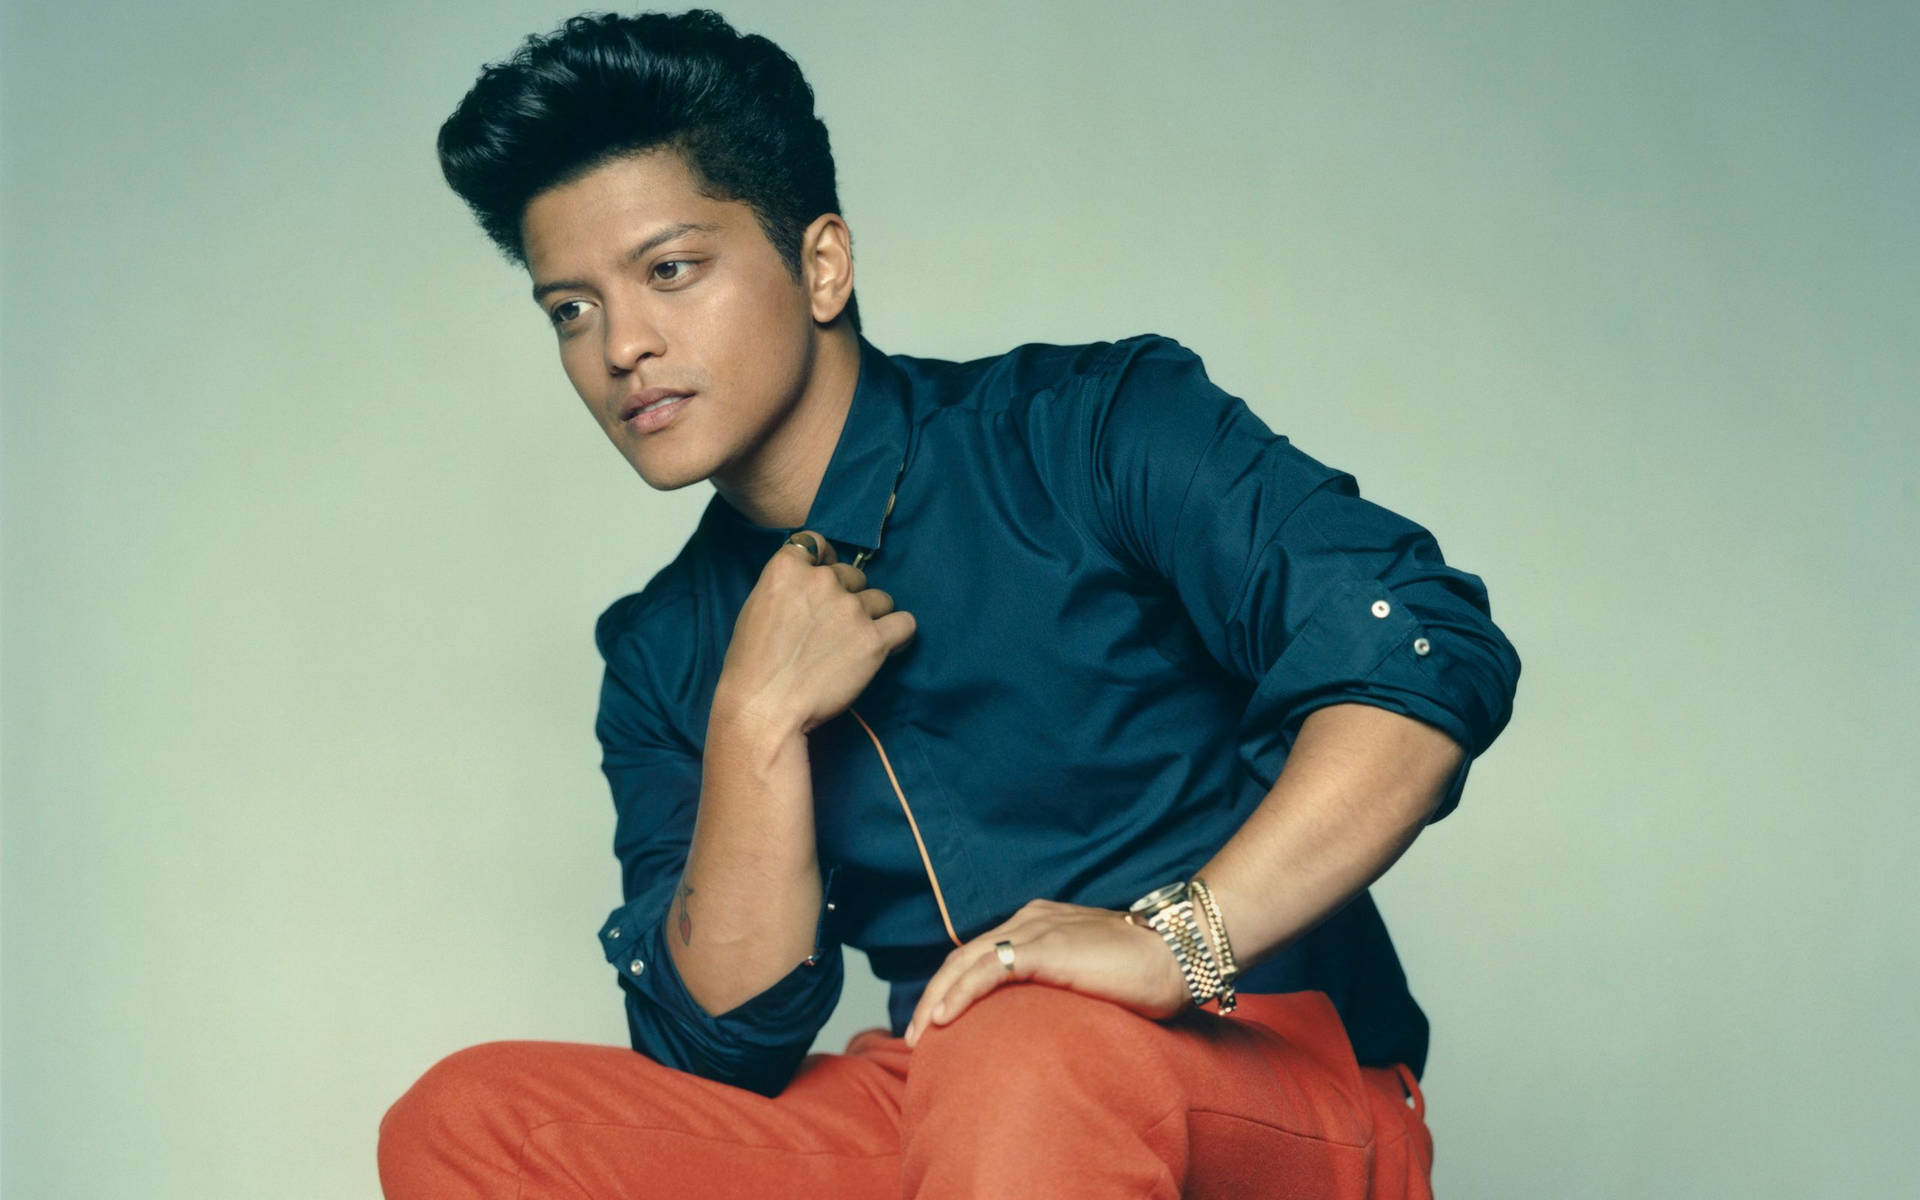 Bruno Mars Performing In An Electric Green Outfit Background